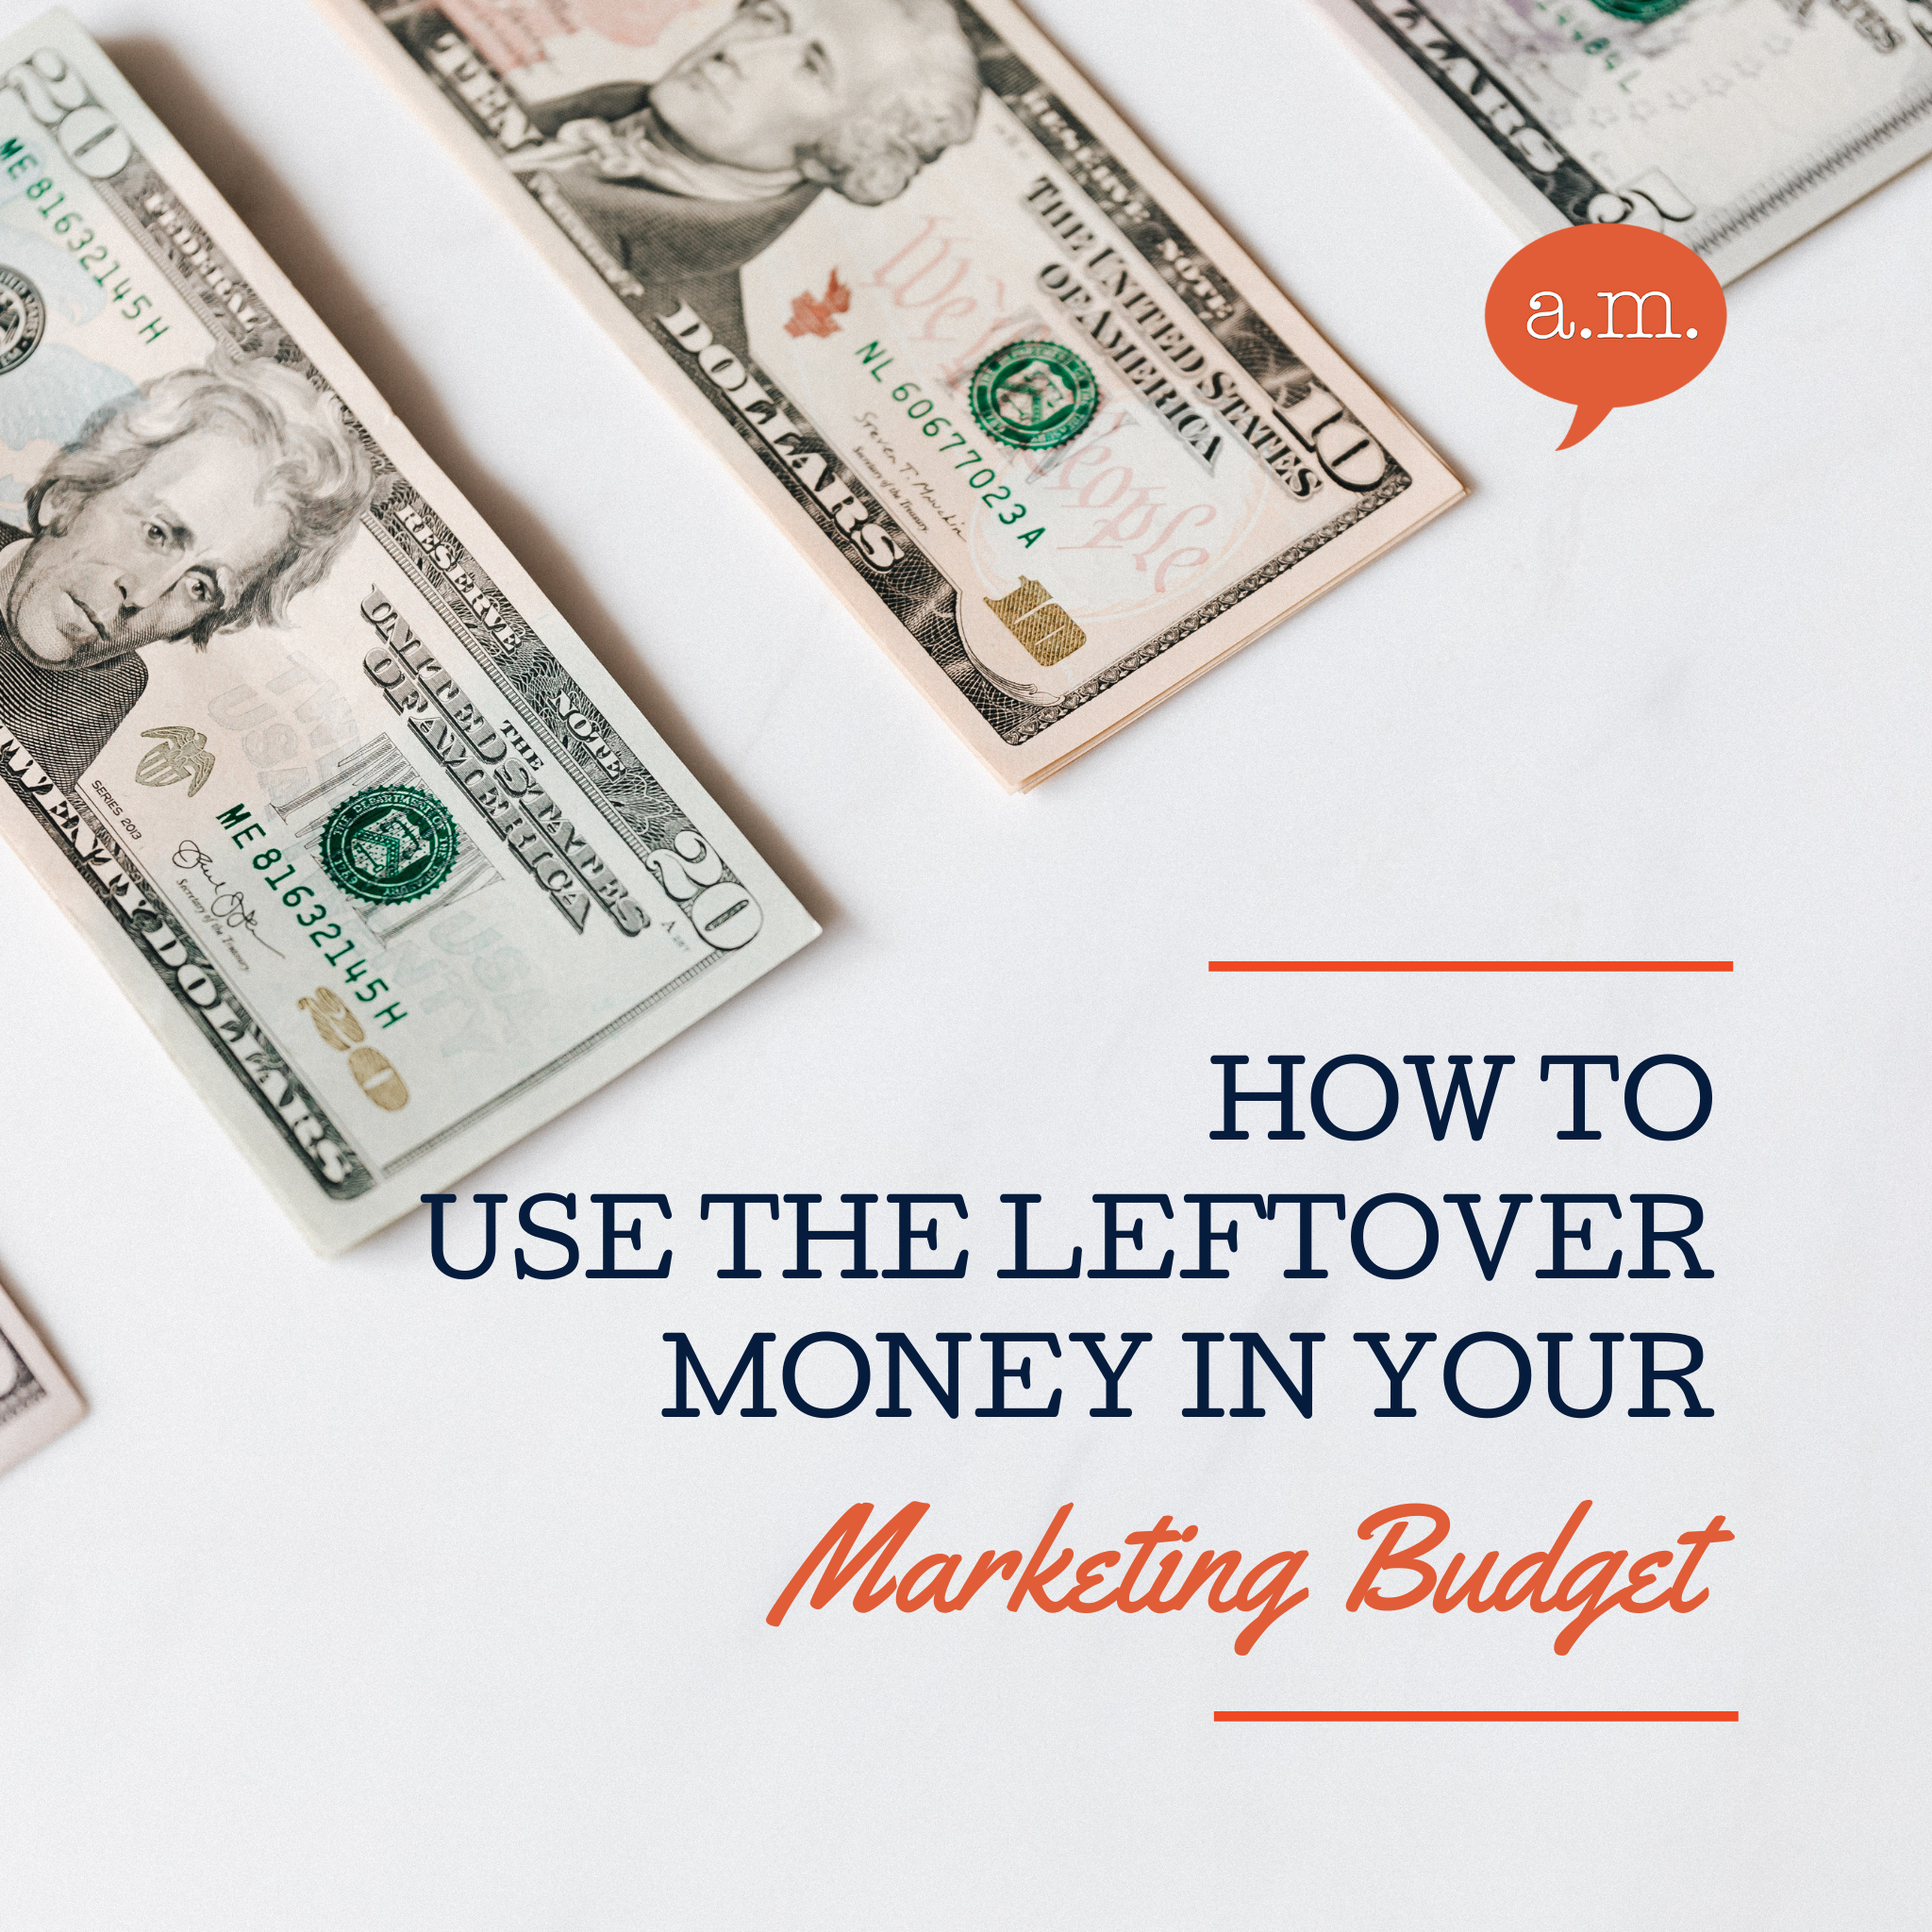 The best way to use the leftover money in your marketing budget